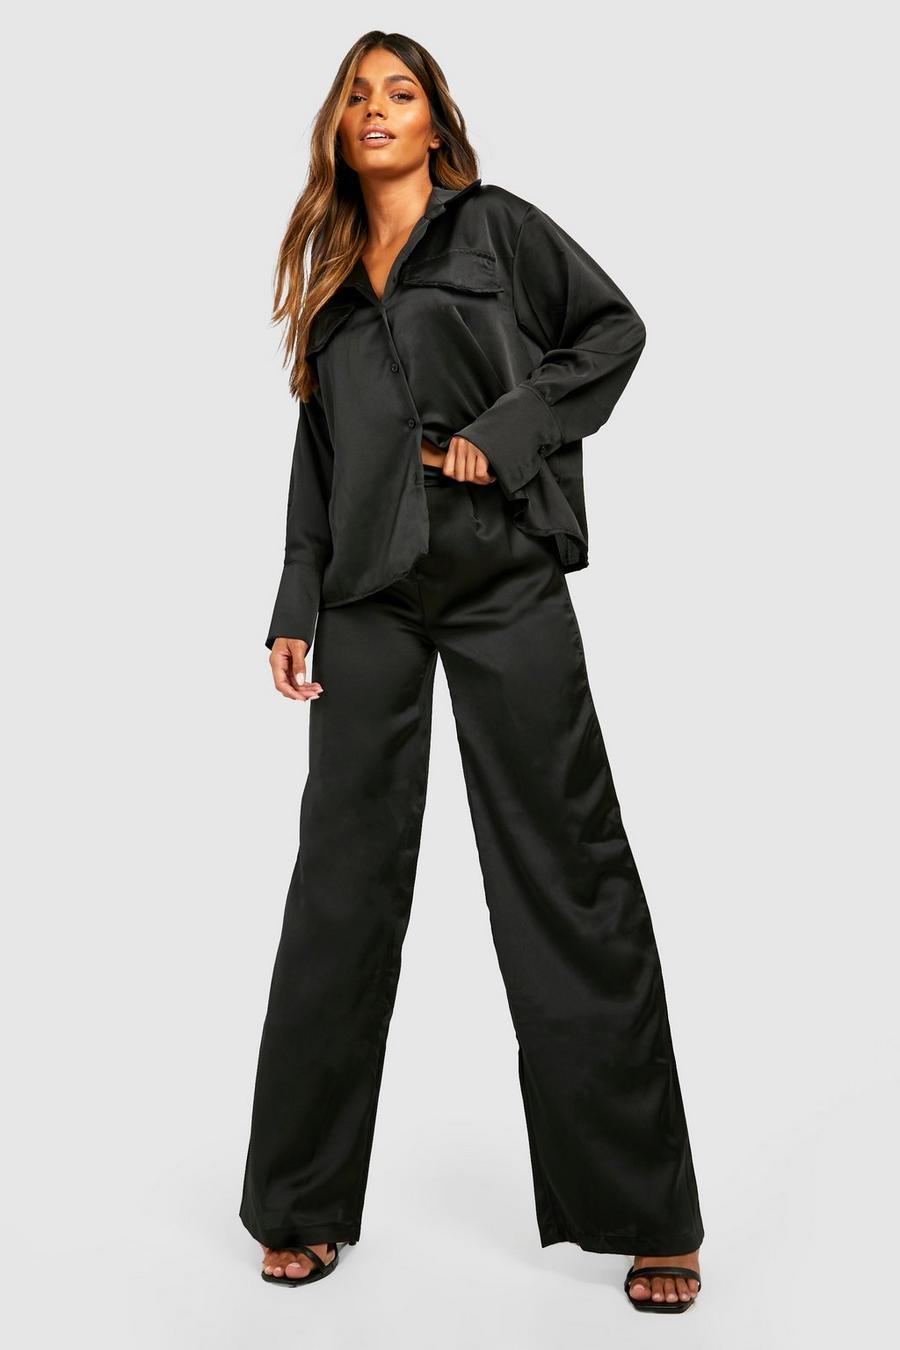 Black Satin Relaxed Fit Shirt & Wide Leg Pants image number 1